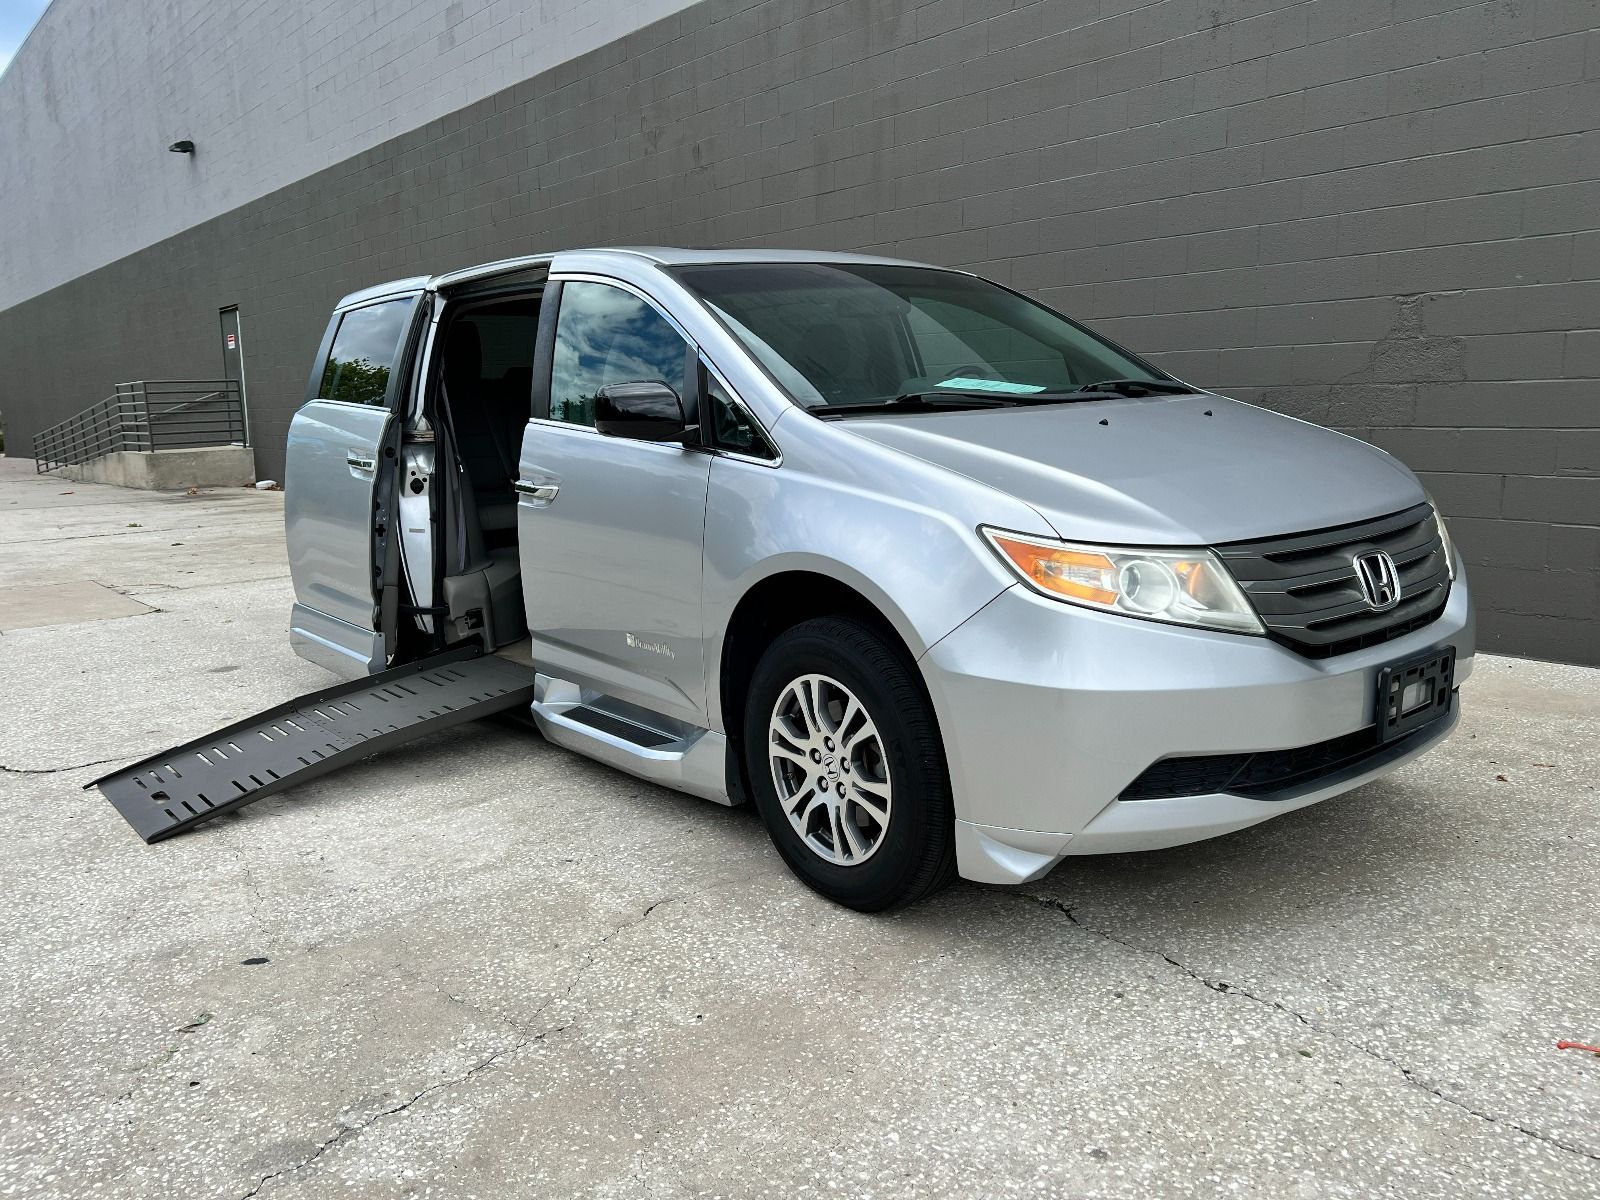 Passenger side of a silver 2012 Honda Odyssey Wheelchair Van, with ramp deployed, viewed from front angle